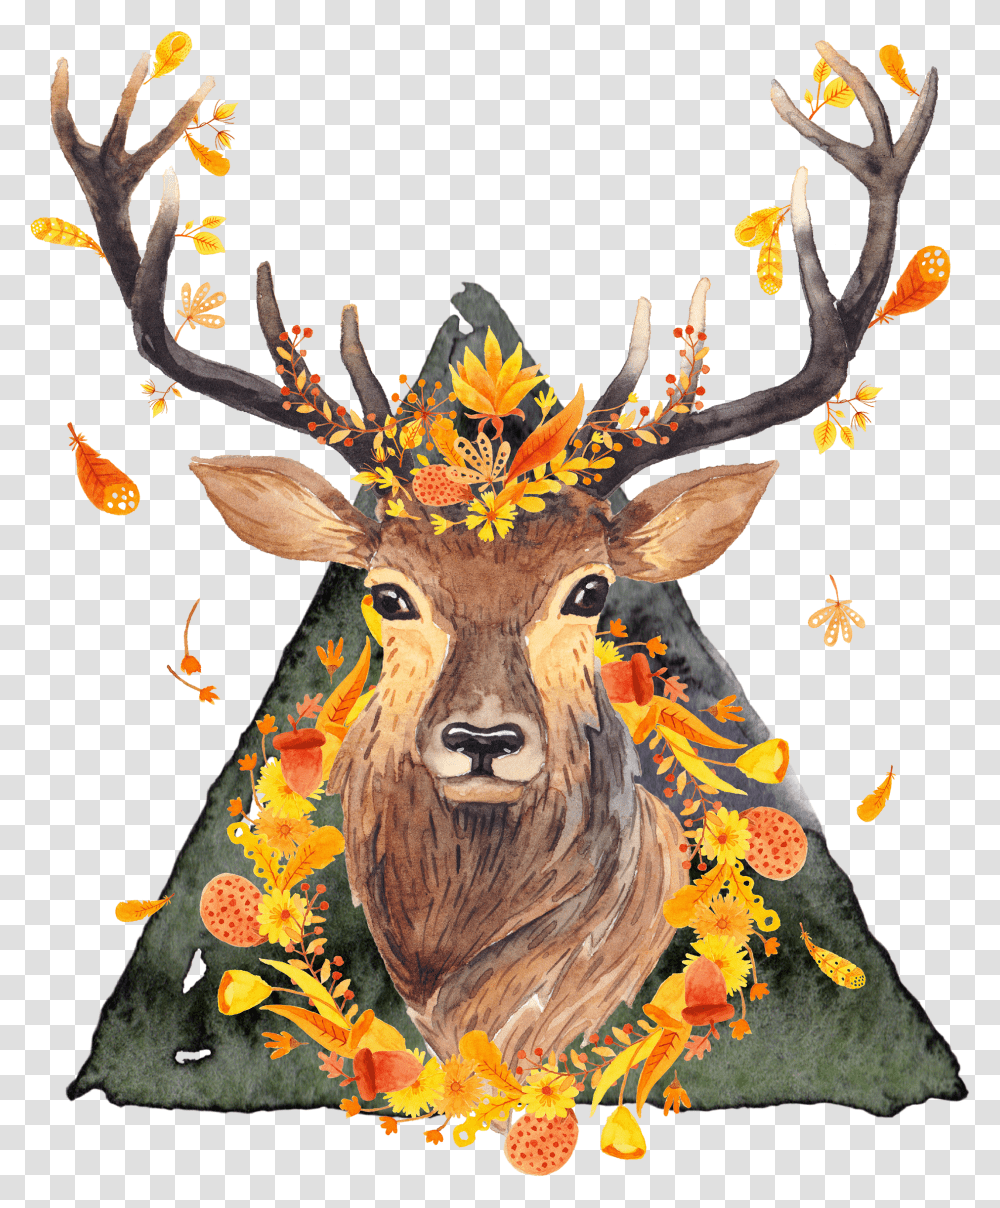 Download Hd I Created This Watercolor Piece Digitally With A Deer With Antlers Painting Transparent Png